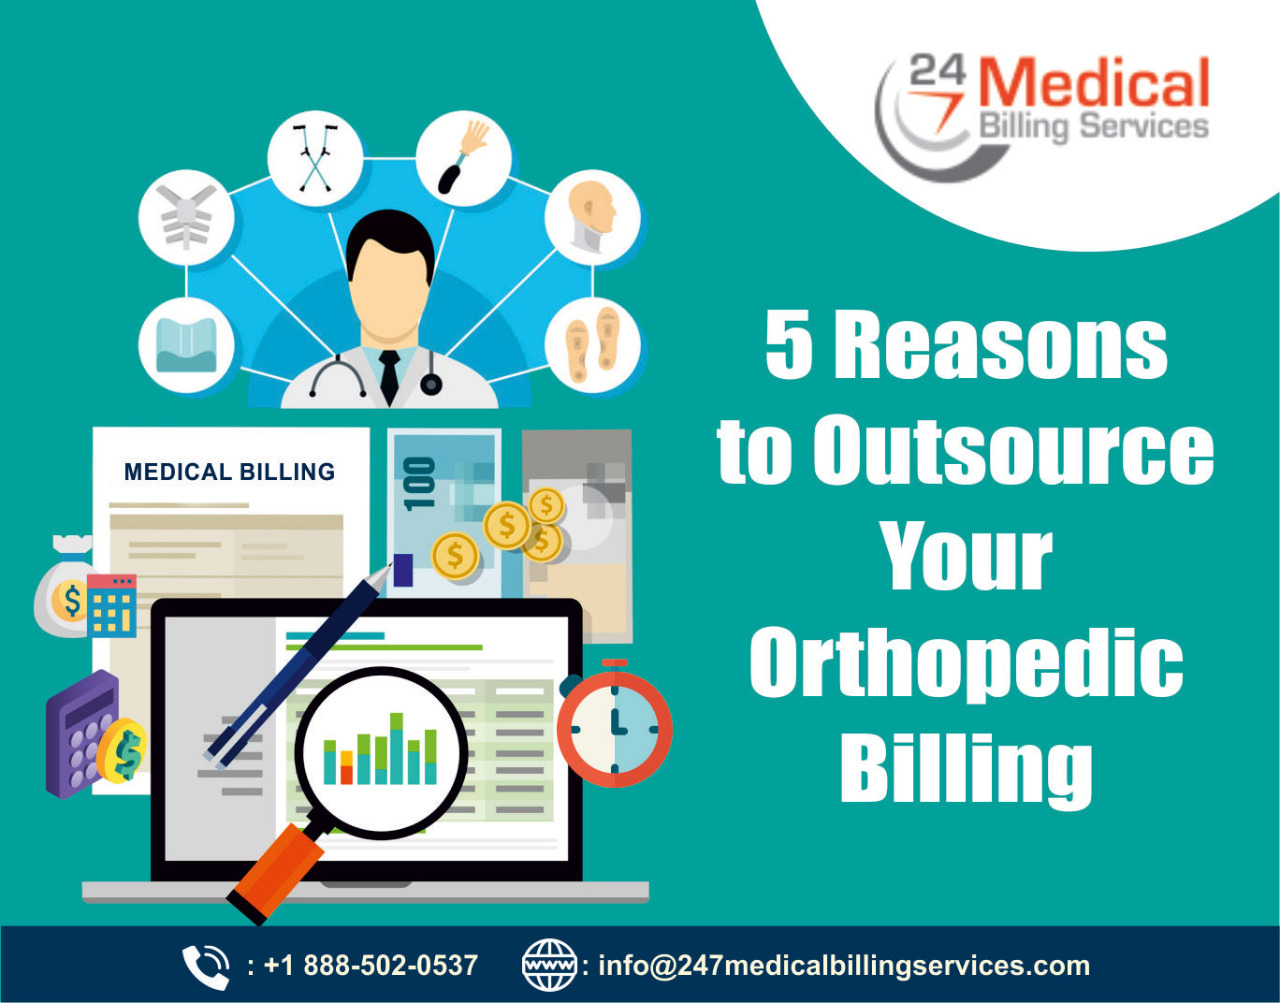 5 Reasons to Outsource Your Orthopaedic Billing, Medical Billing Services, Orthopaedic billing, Oursourcing medical billing